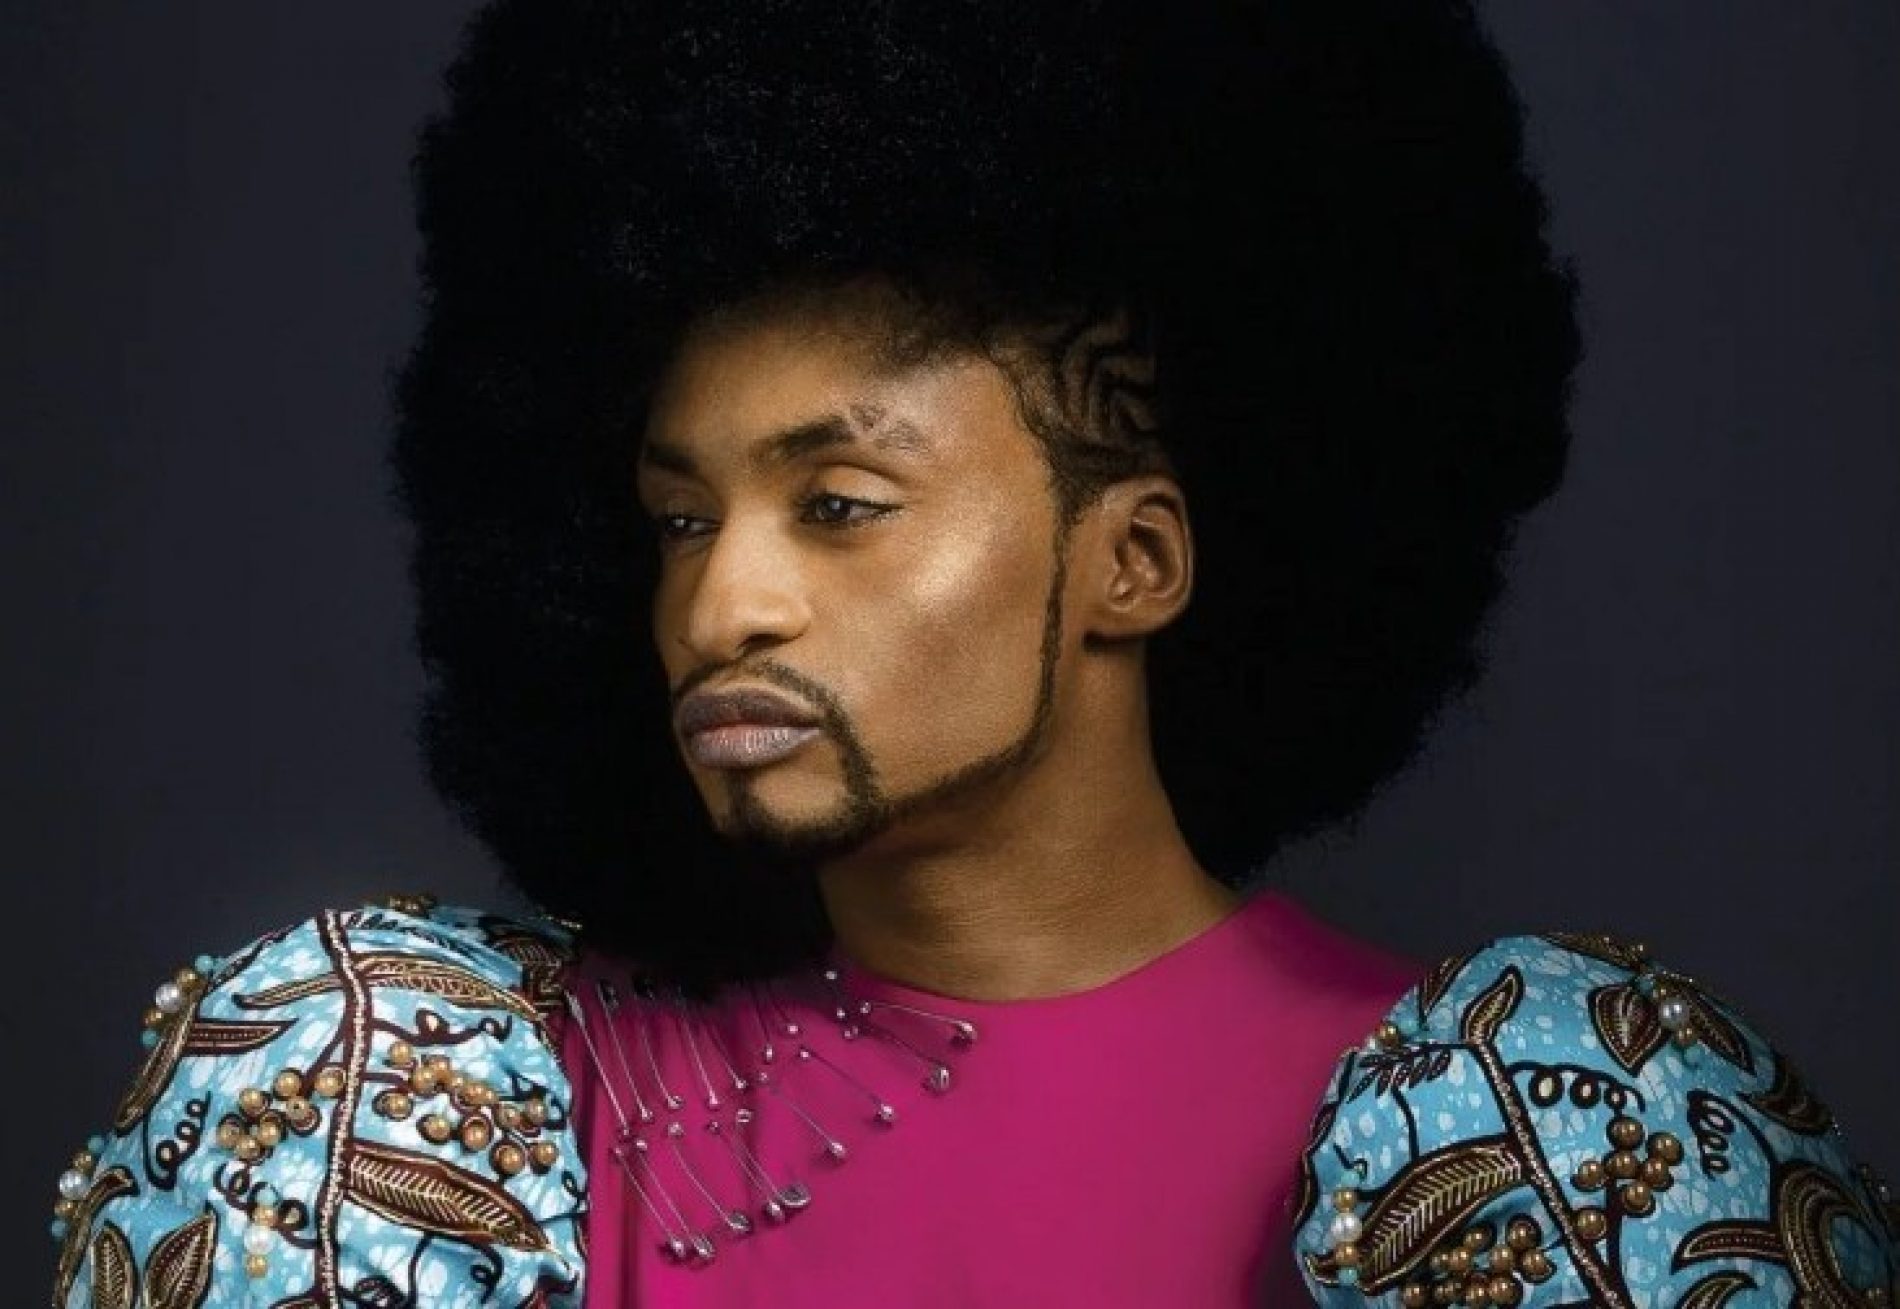 “I Have A Good Laugh Over These Things.” Denrele Edun claps back at trolls who call him “Gay” like it’s an insult